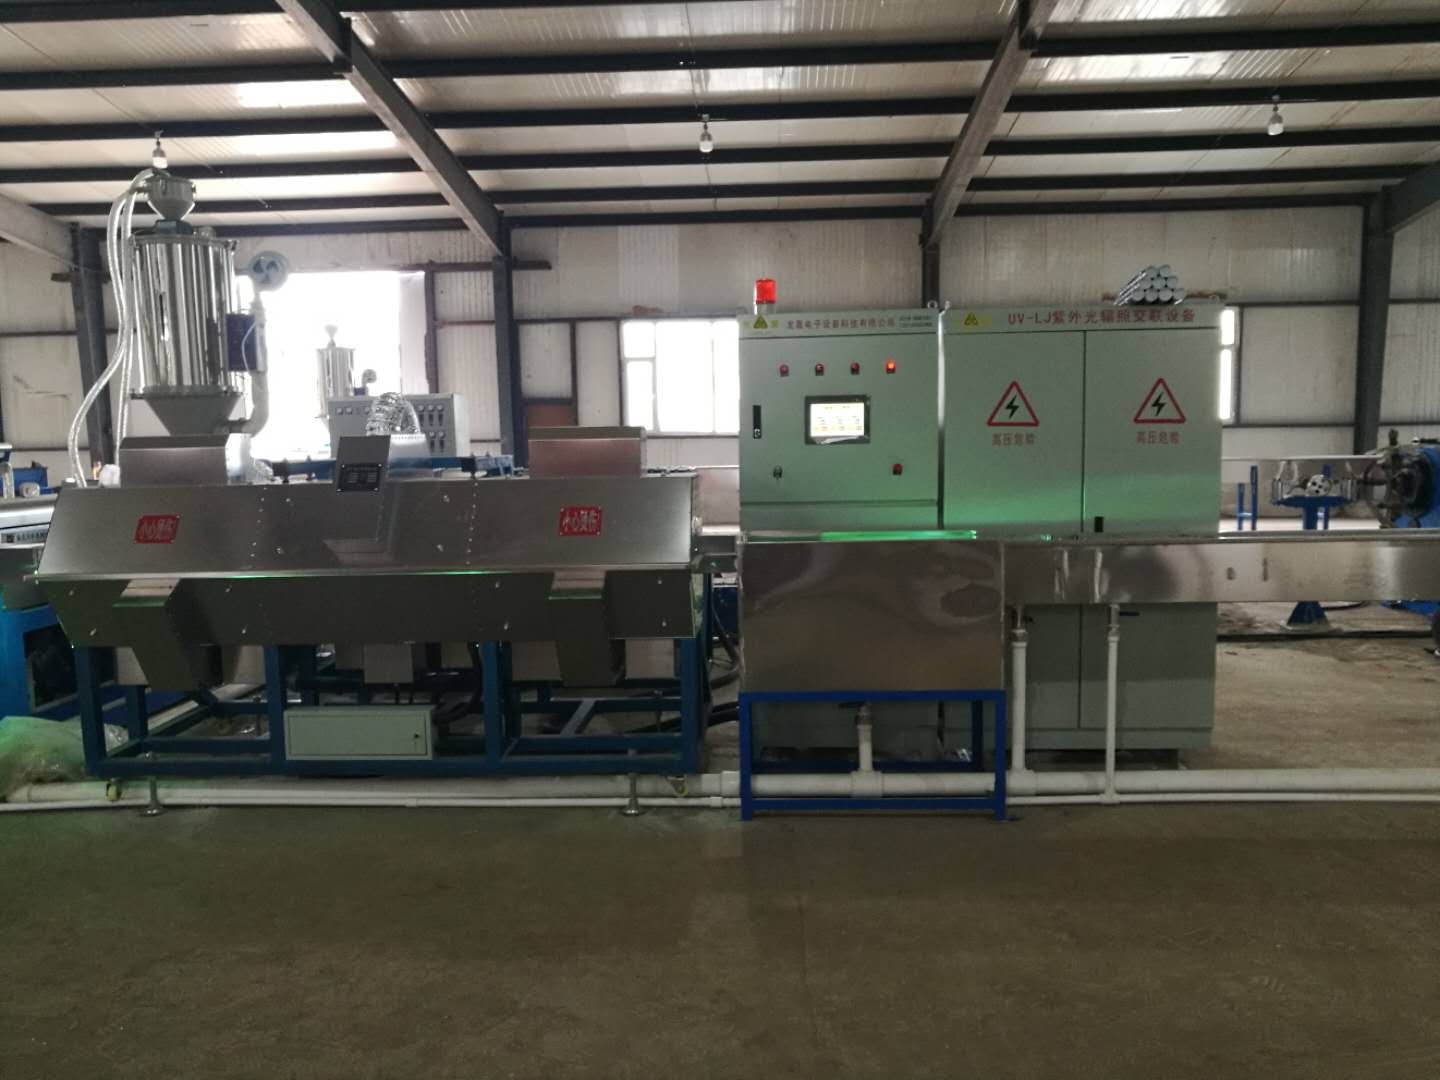 LSUV-LJ uv irradiation crosslinking equipment used at the cable plant site